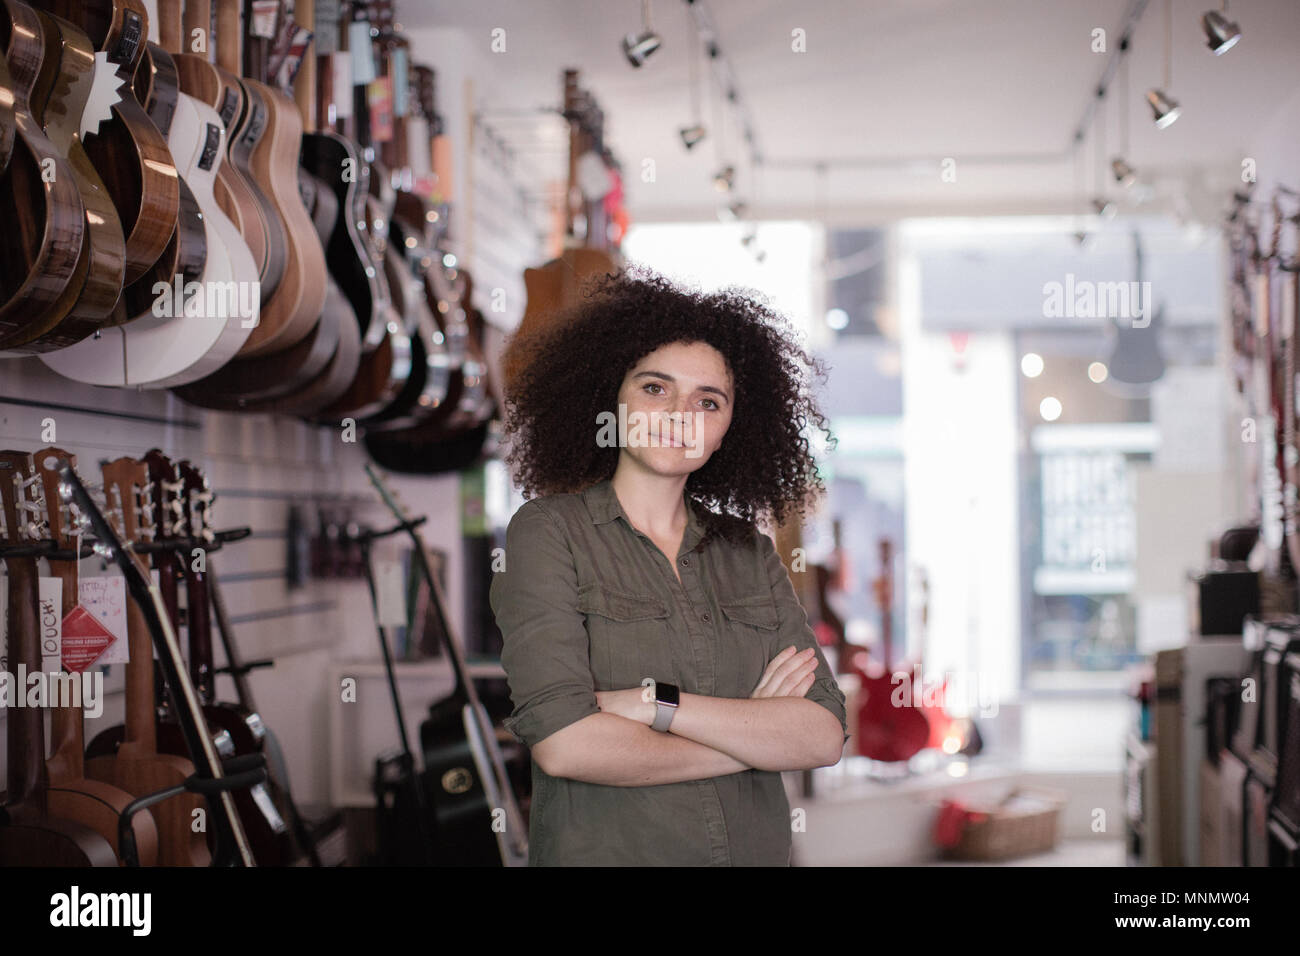 Portrait of a small business owner in a guitar store Stock Photo